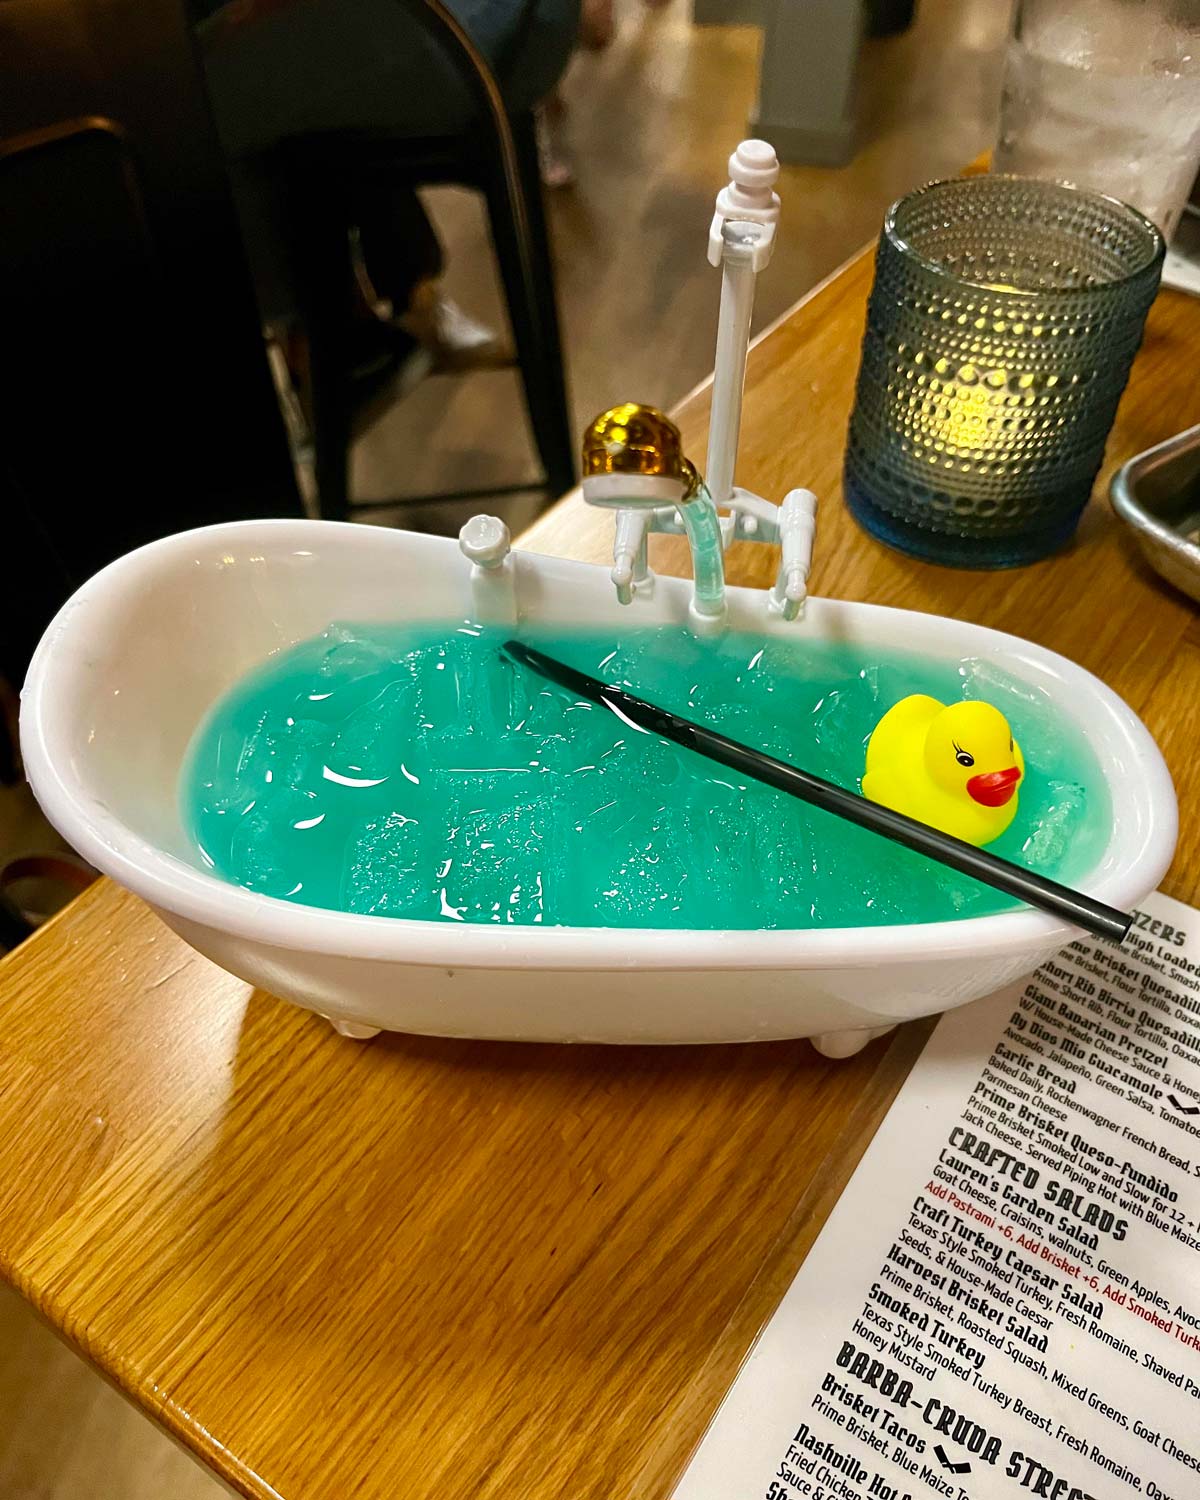 My cocktail came in a bathtub. It’s called Duck around and find out